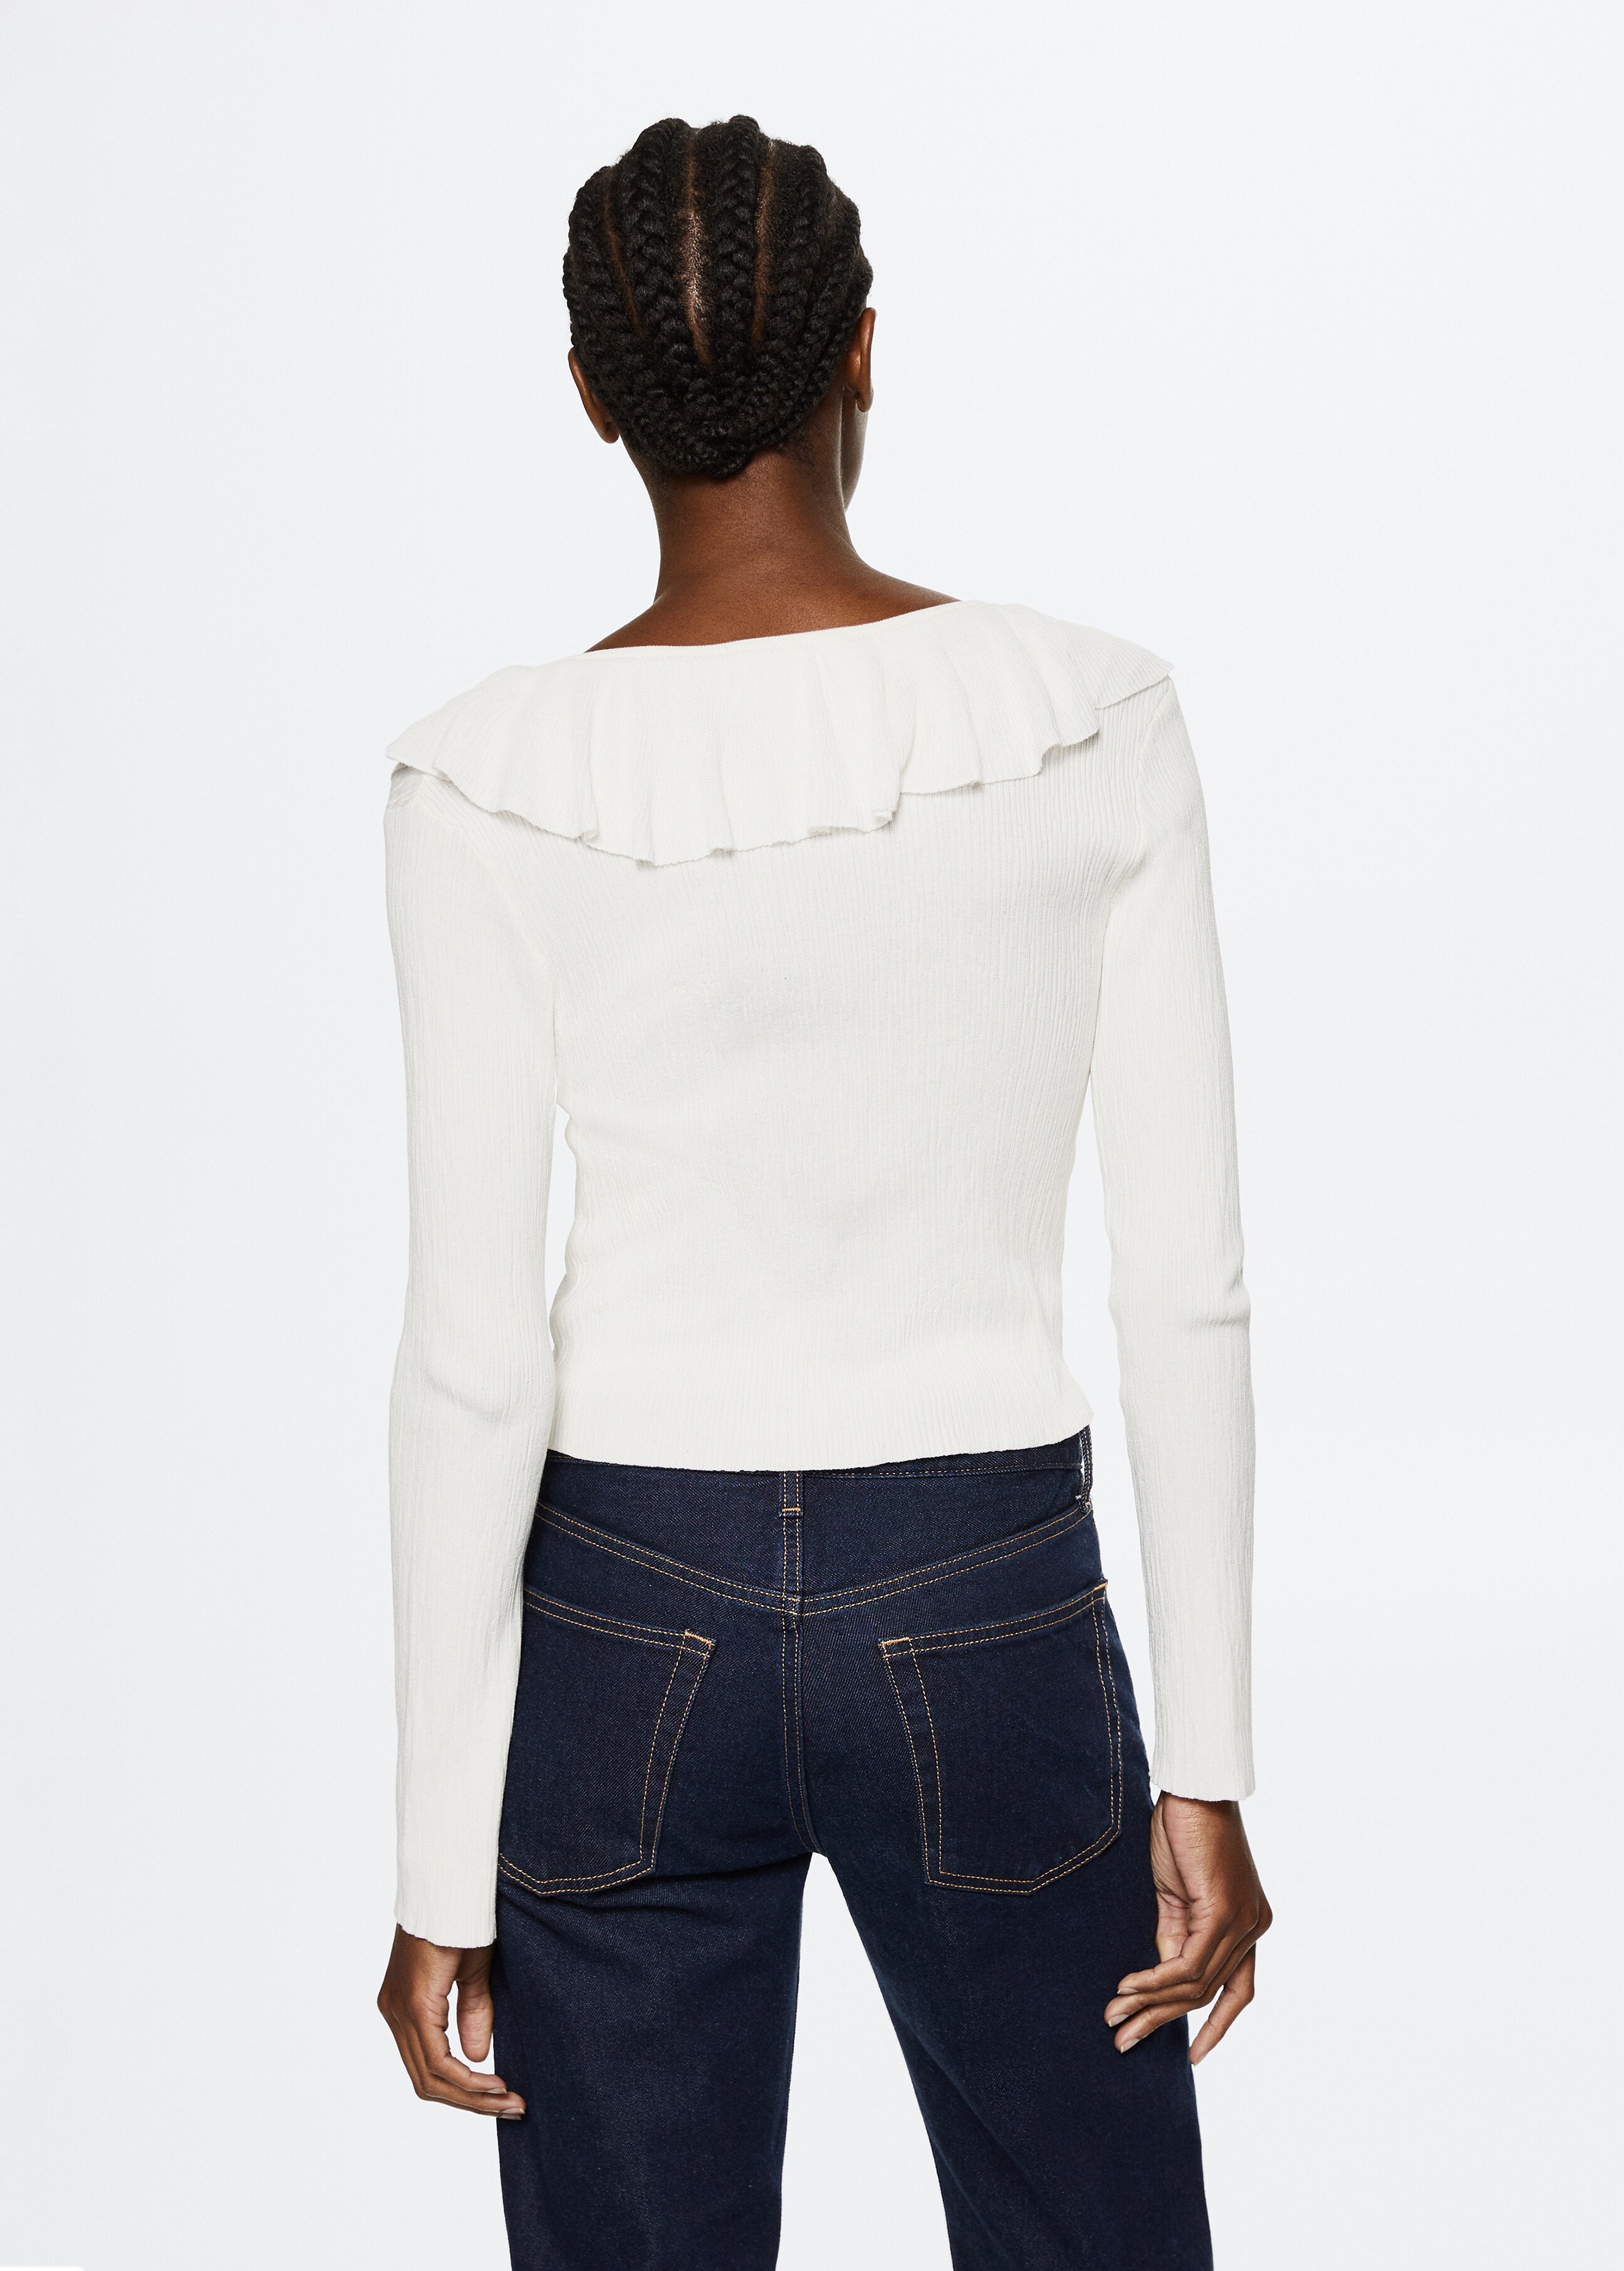 Ruffle neck sweater - Reverse of the article